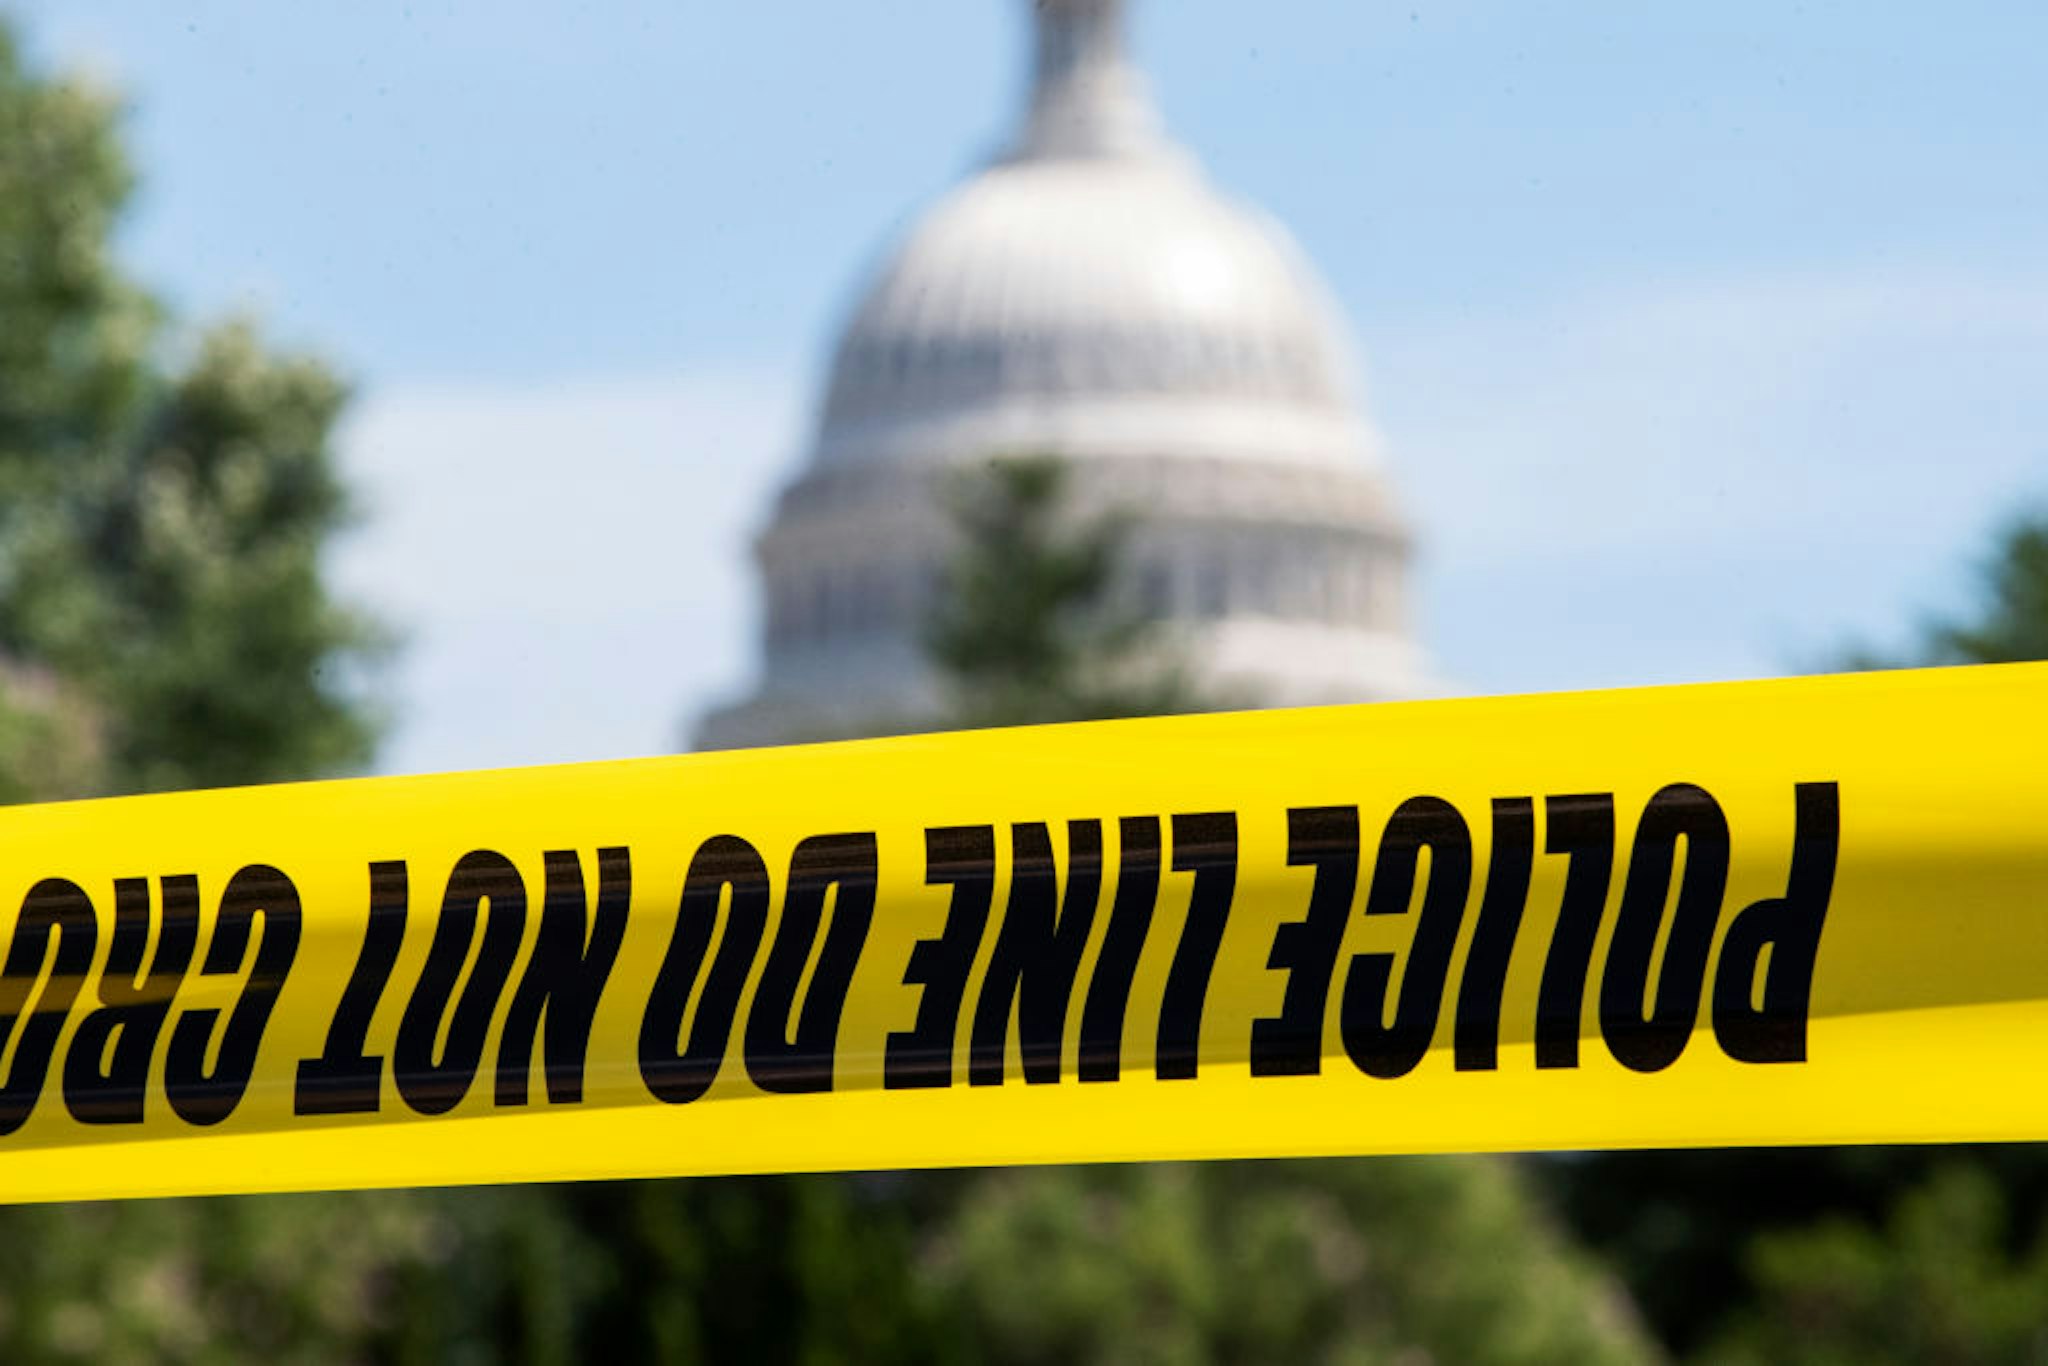 UNITED STATES - AUGUST 19: Police tape is seen on Independence Avenue, SW, during the active threat of a man claiming he has a bomb near the Library of Congress buildings on Thursday, August 19, 2021. (Photo By Tom Williams/CQ-Roll Call, Inc via Getty Images)